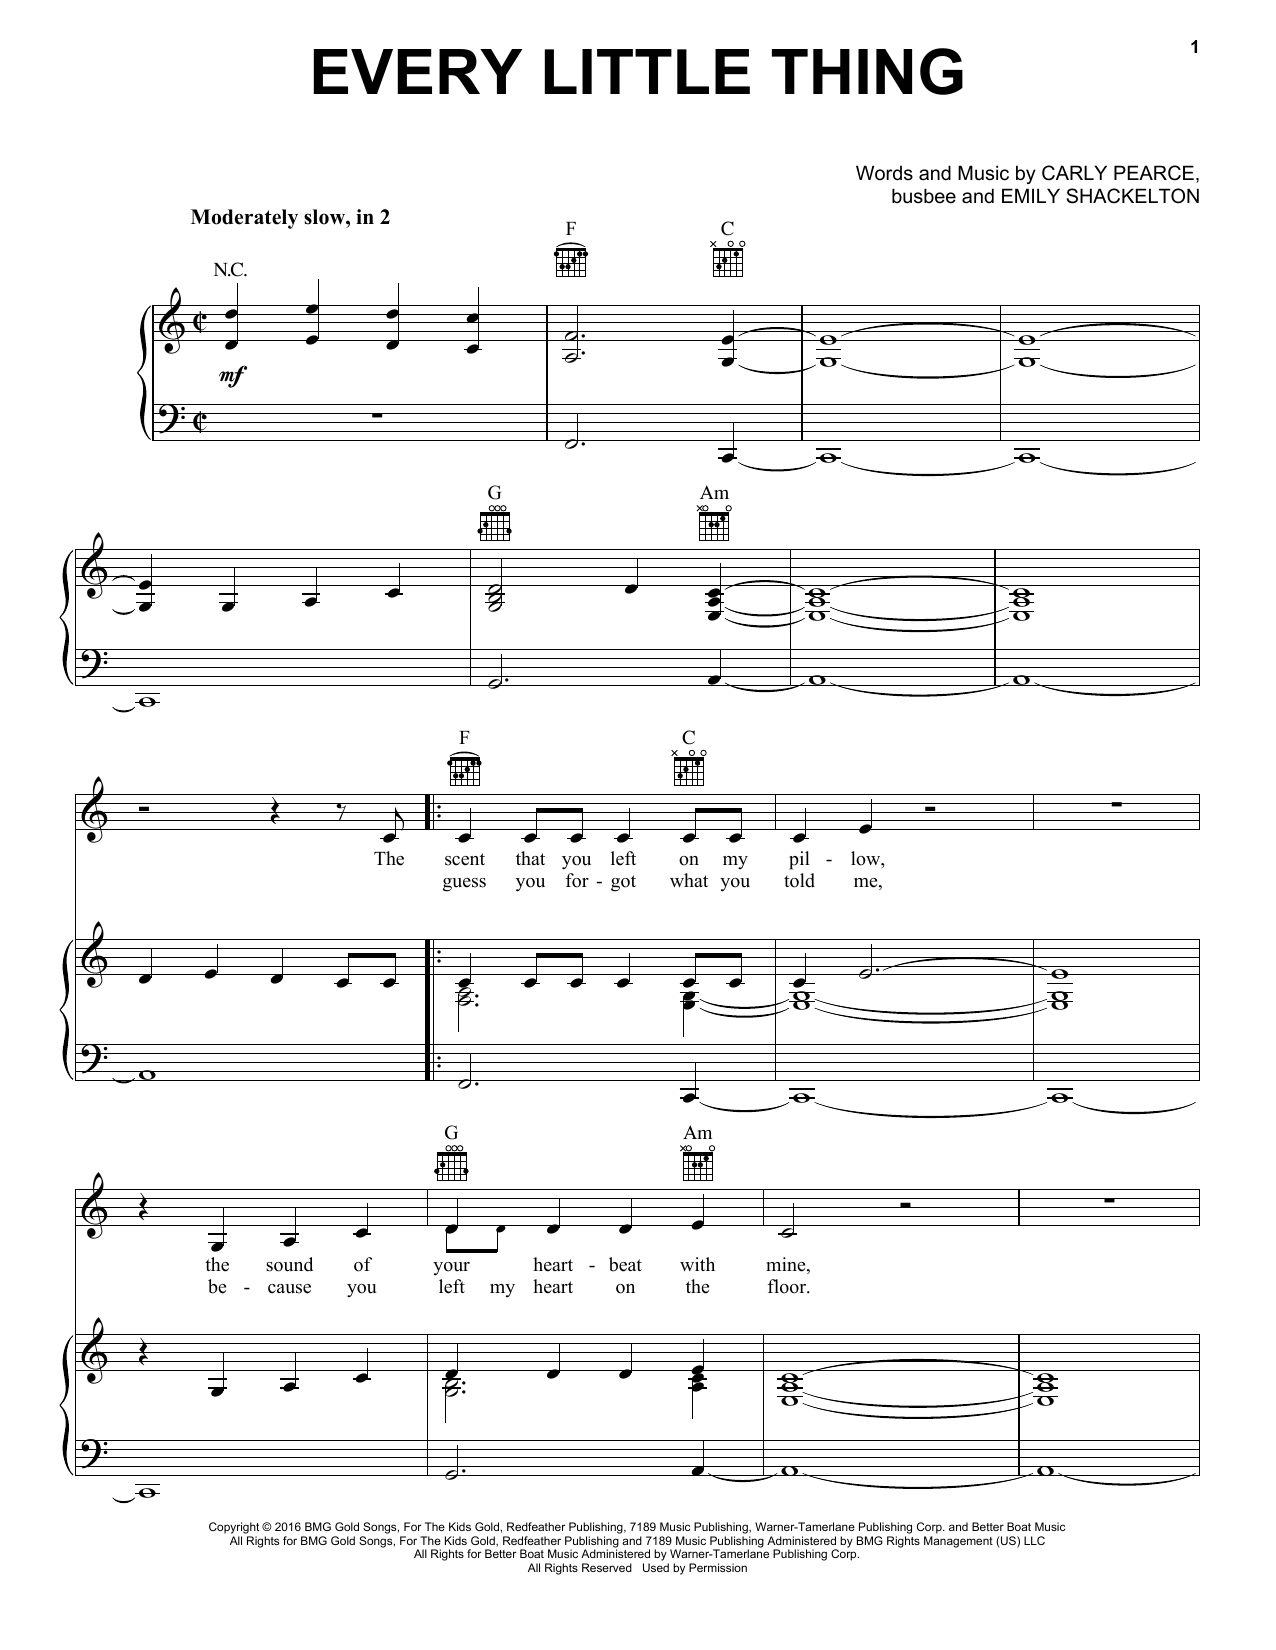 Download Carly Pearce Every Little Thing Sheet Music